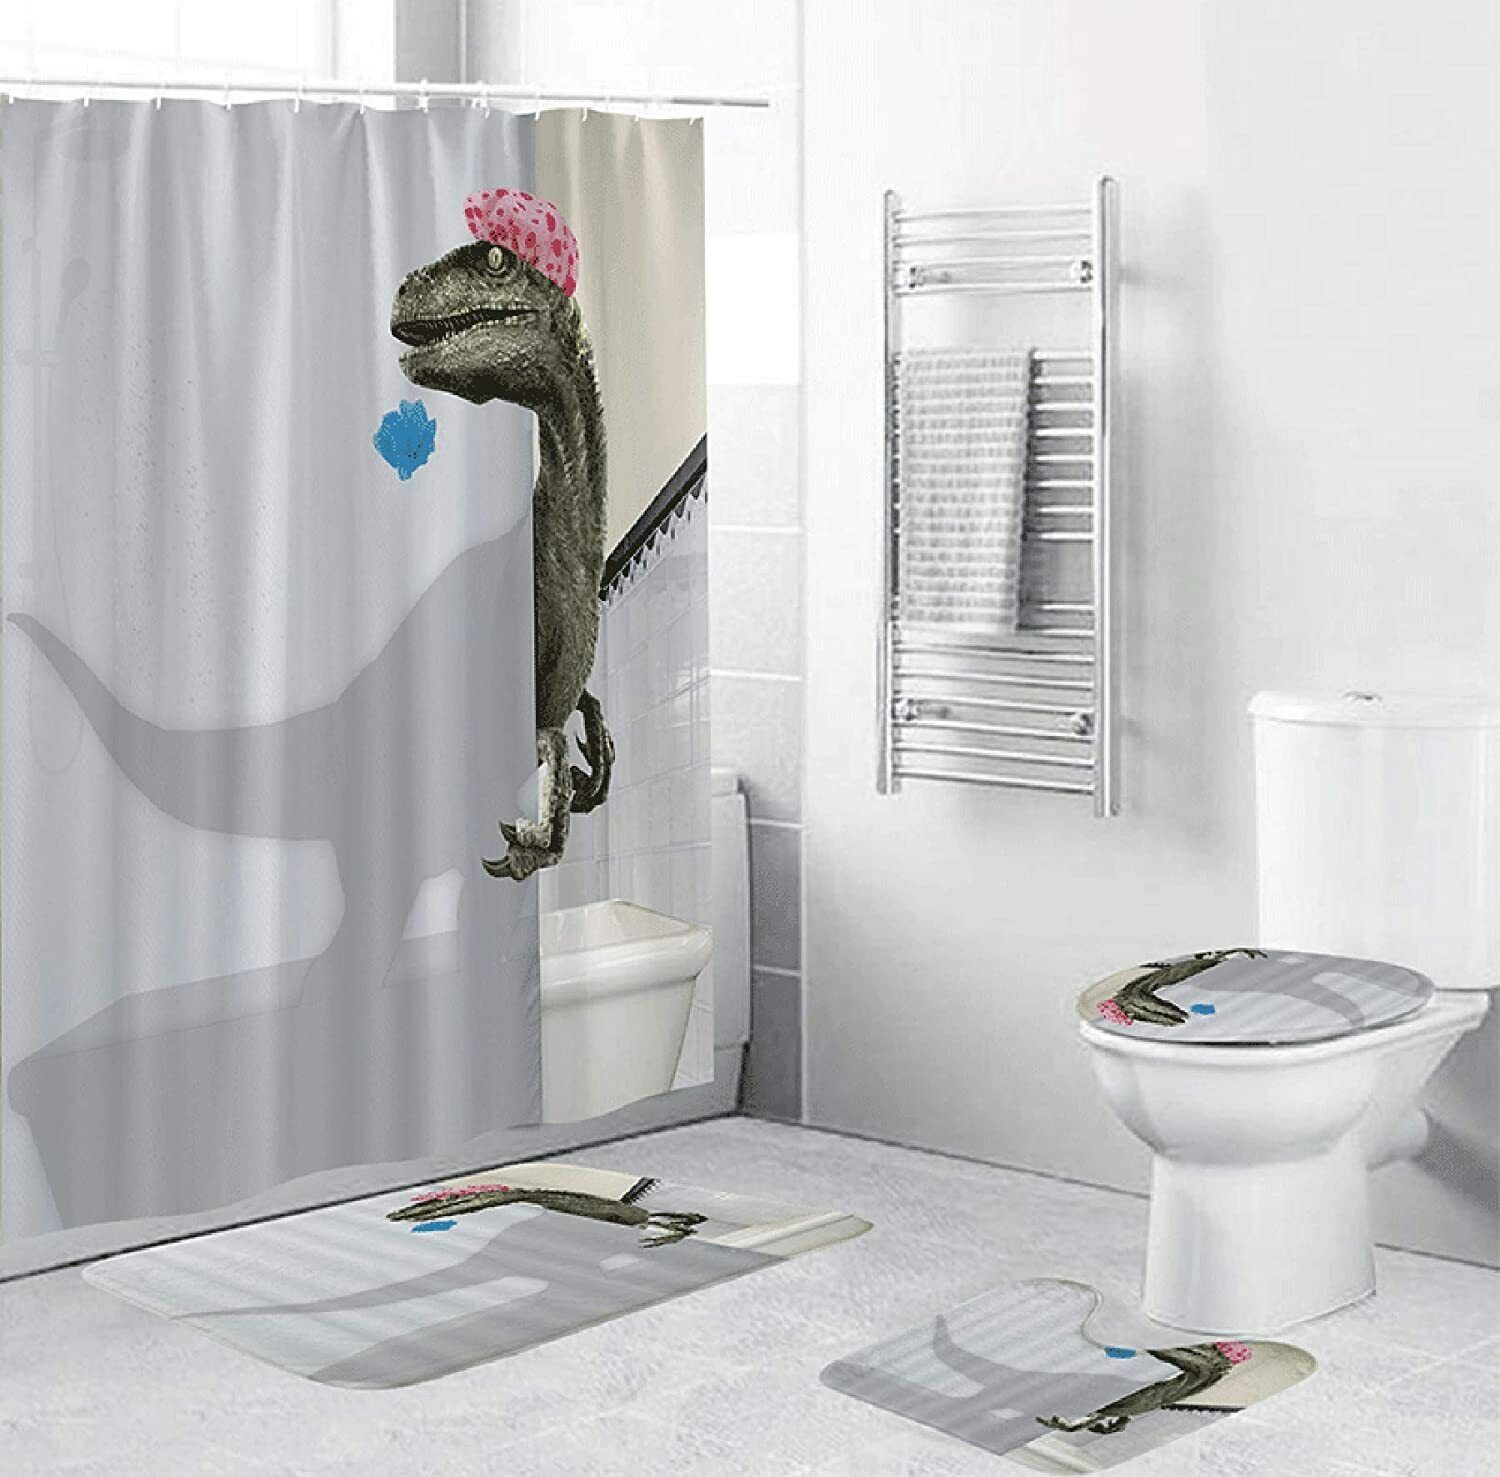 4Pcs Dinosaur Shower Curtain Set with Non-Slip Rug Toilet Lid Cover and Bath Mat